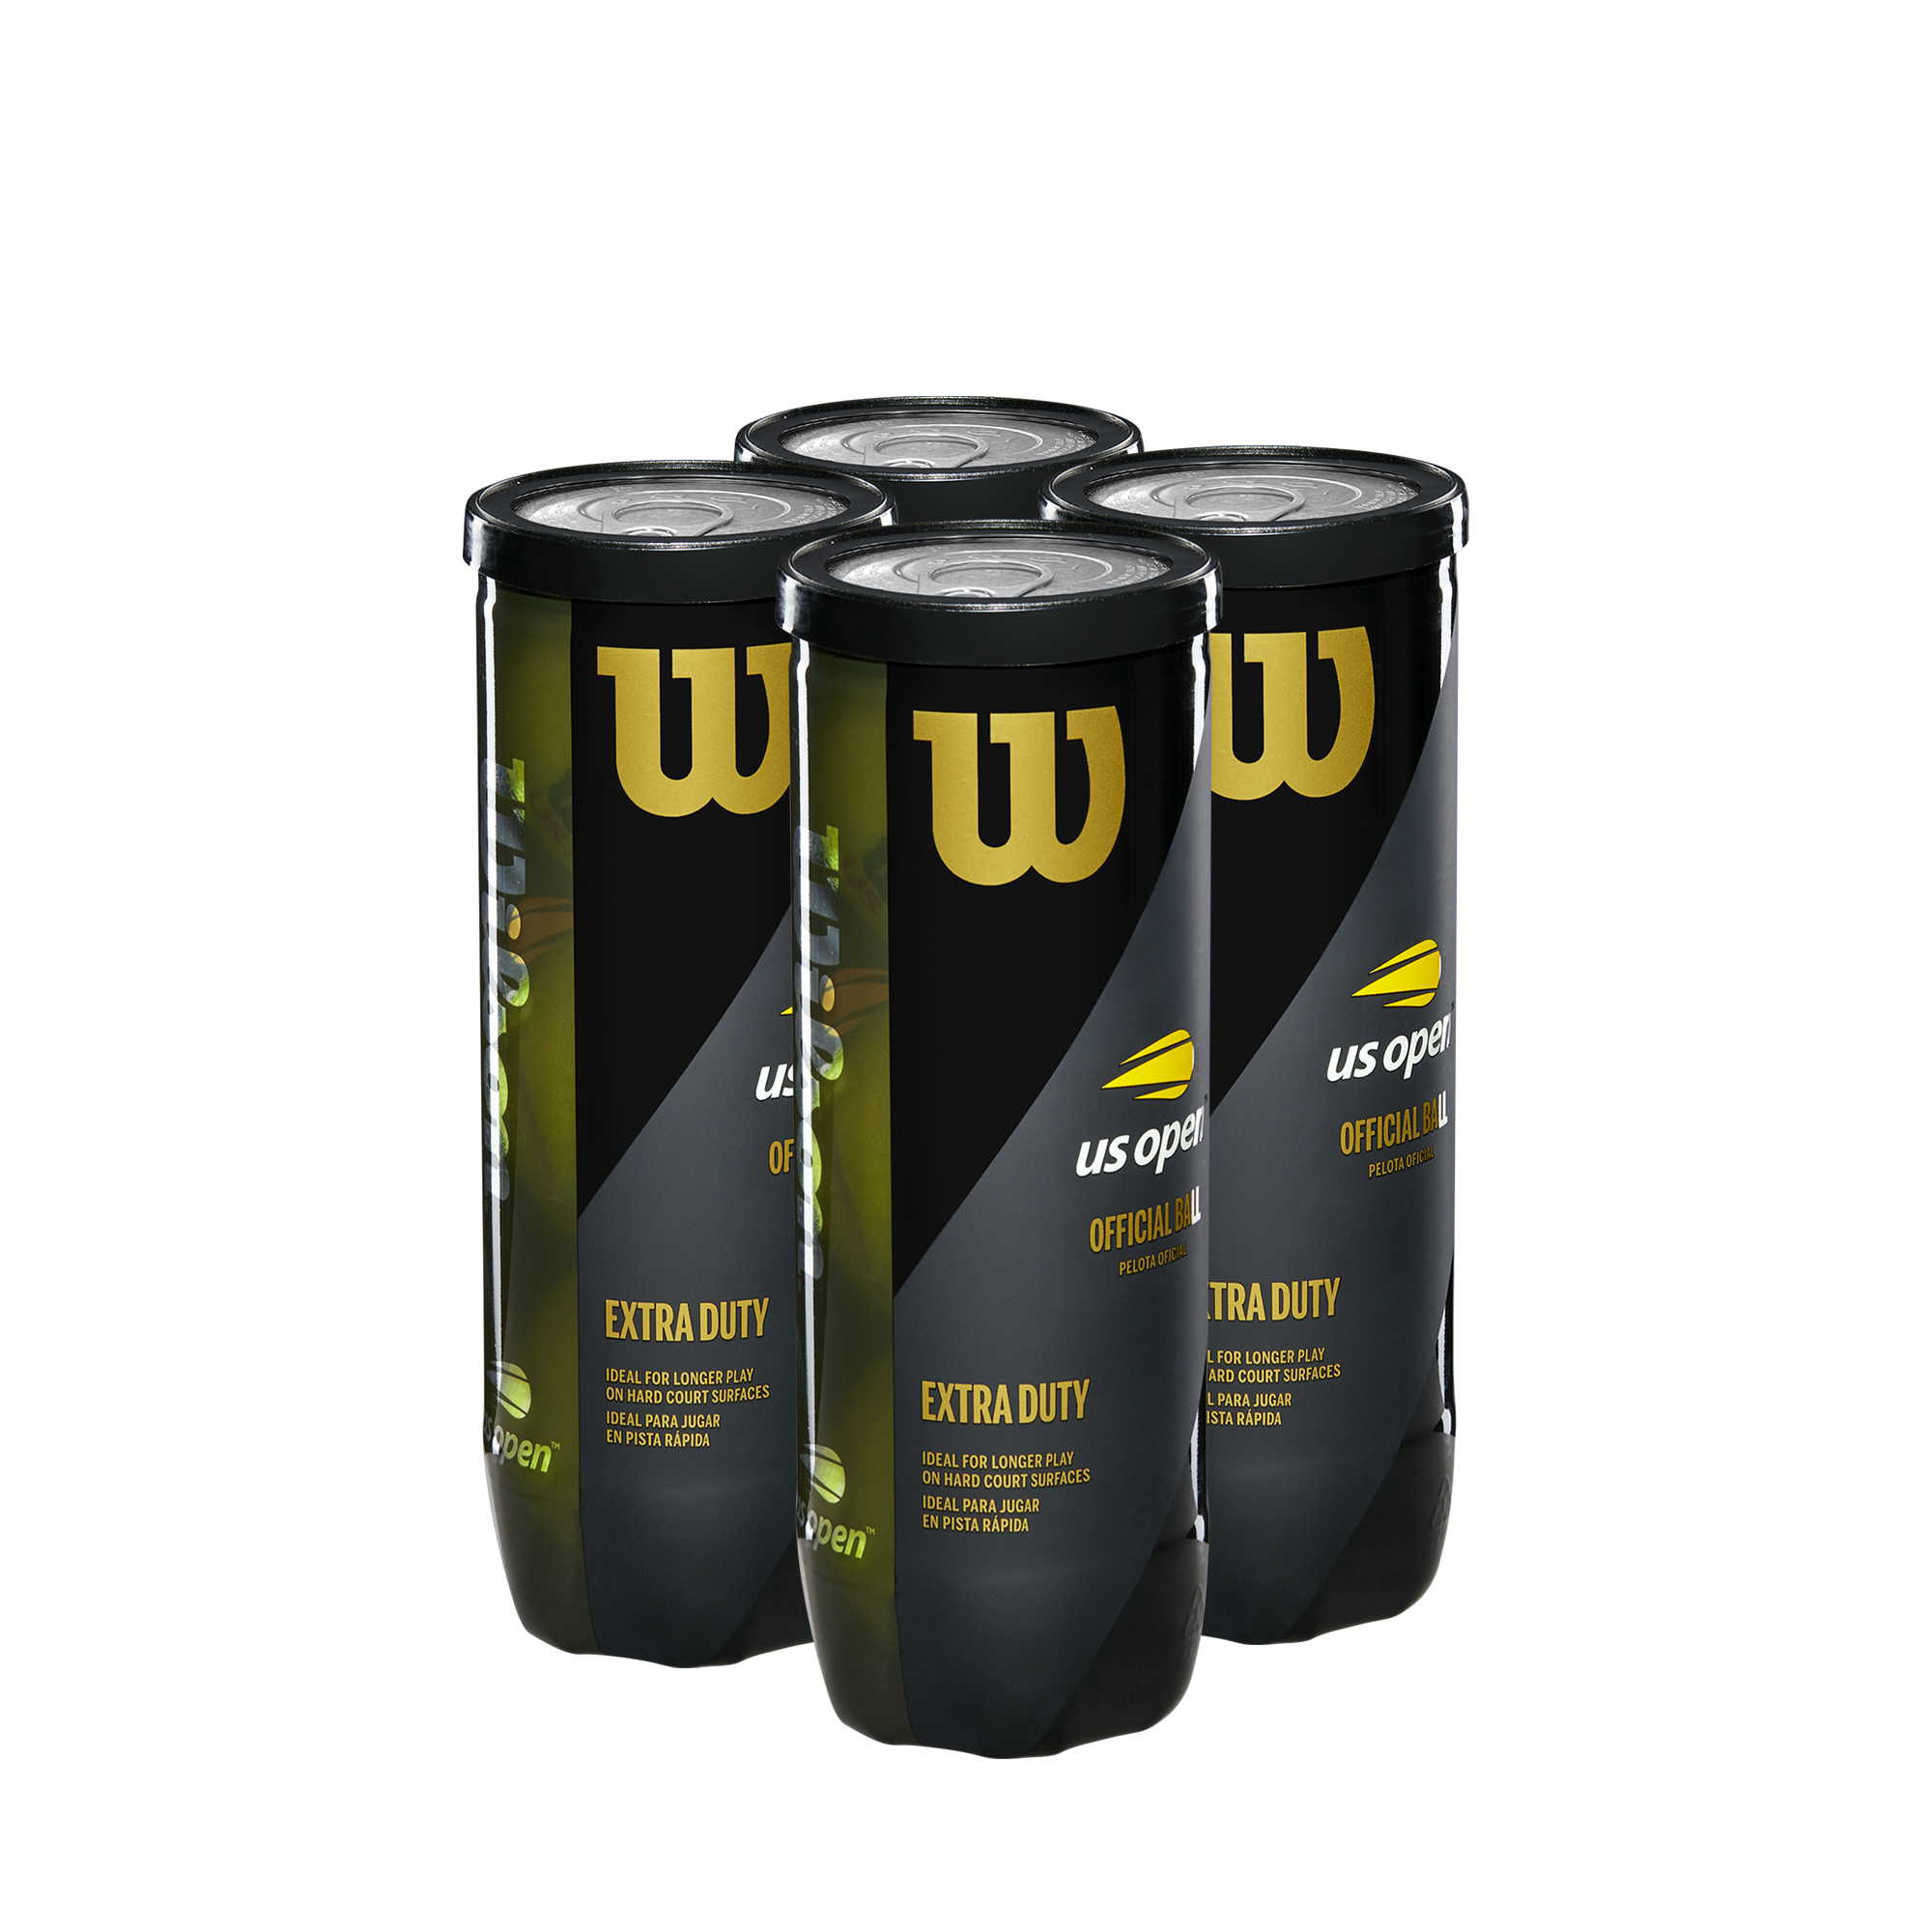 Wilson US Open Extra Duty 3 Tennis Ball Pack - 4  Cans